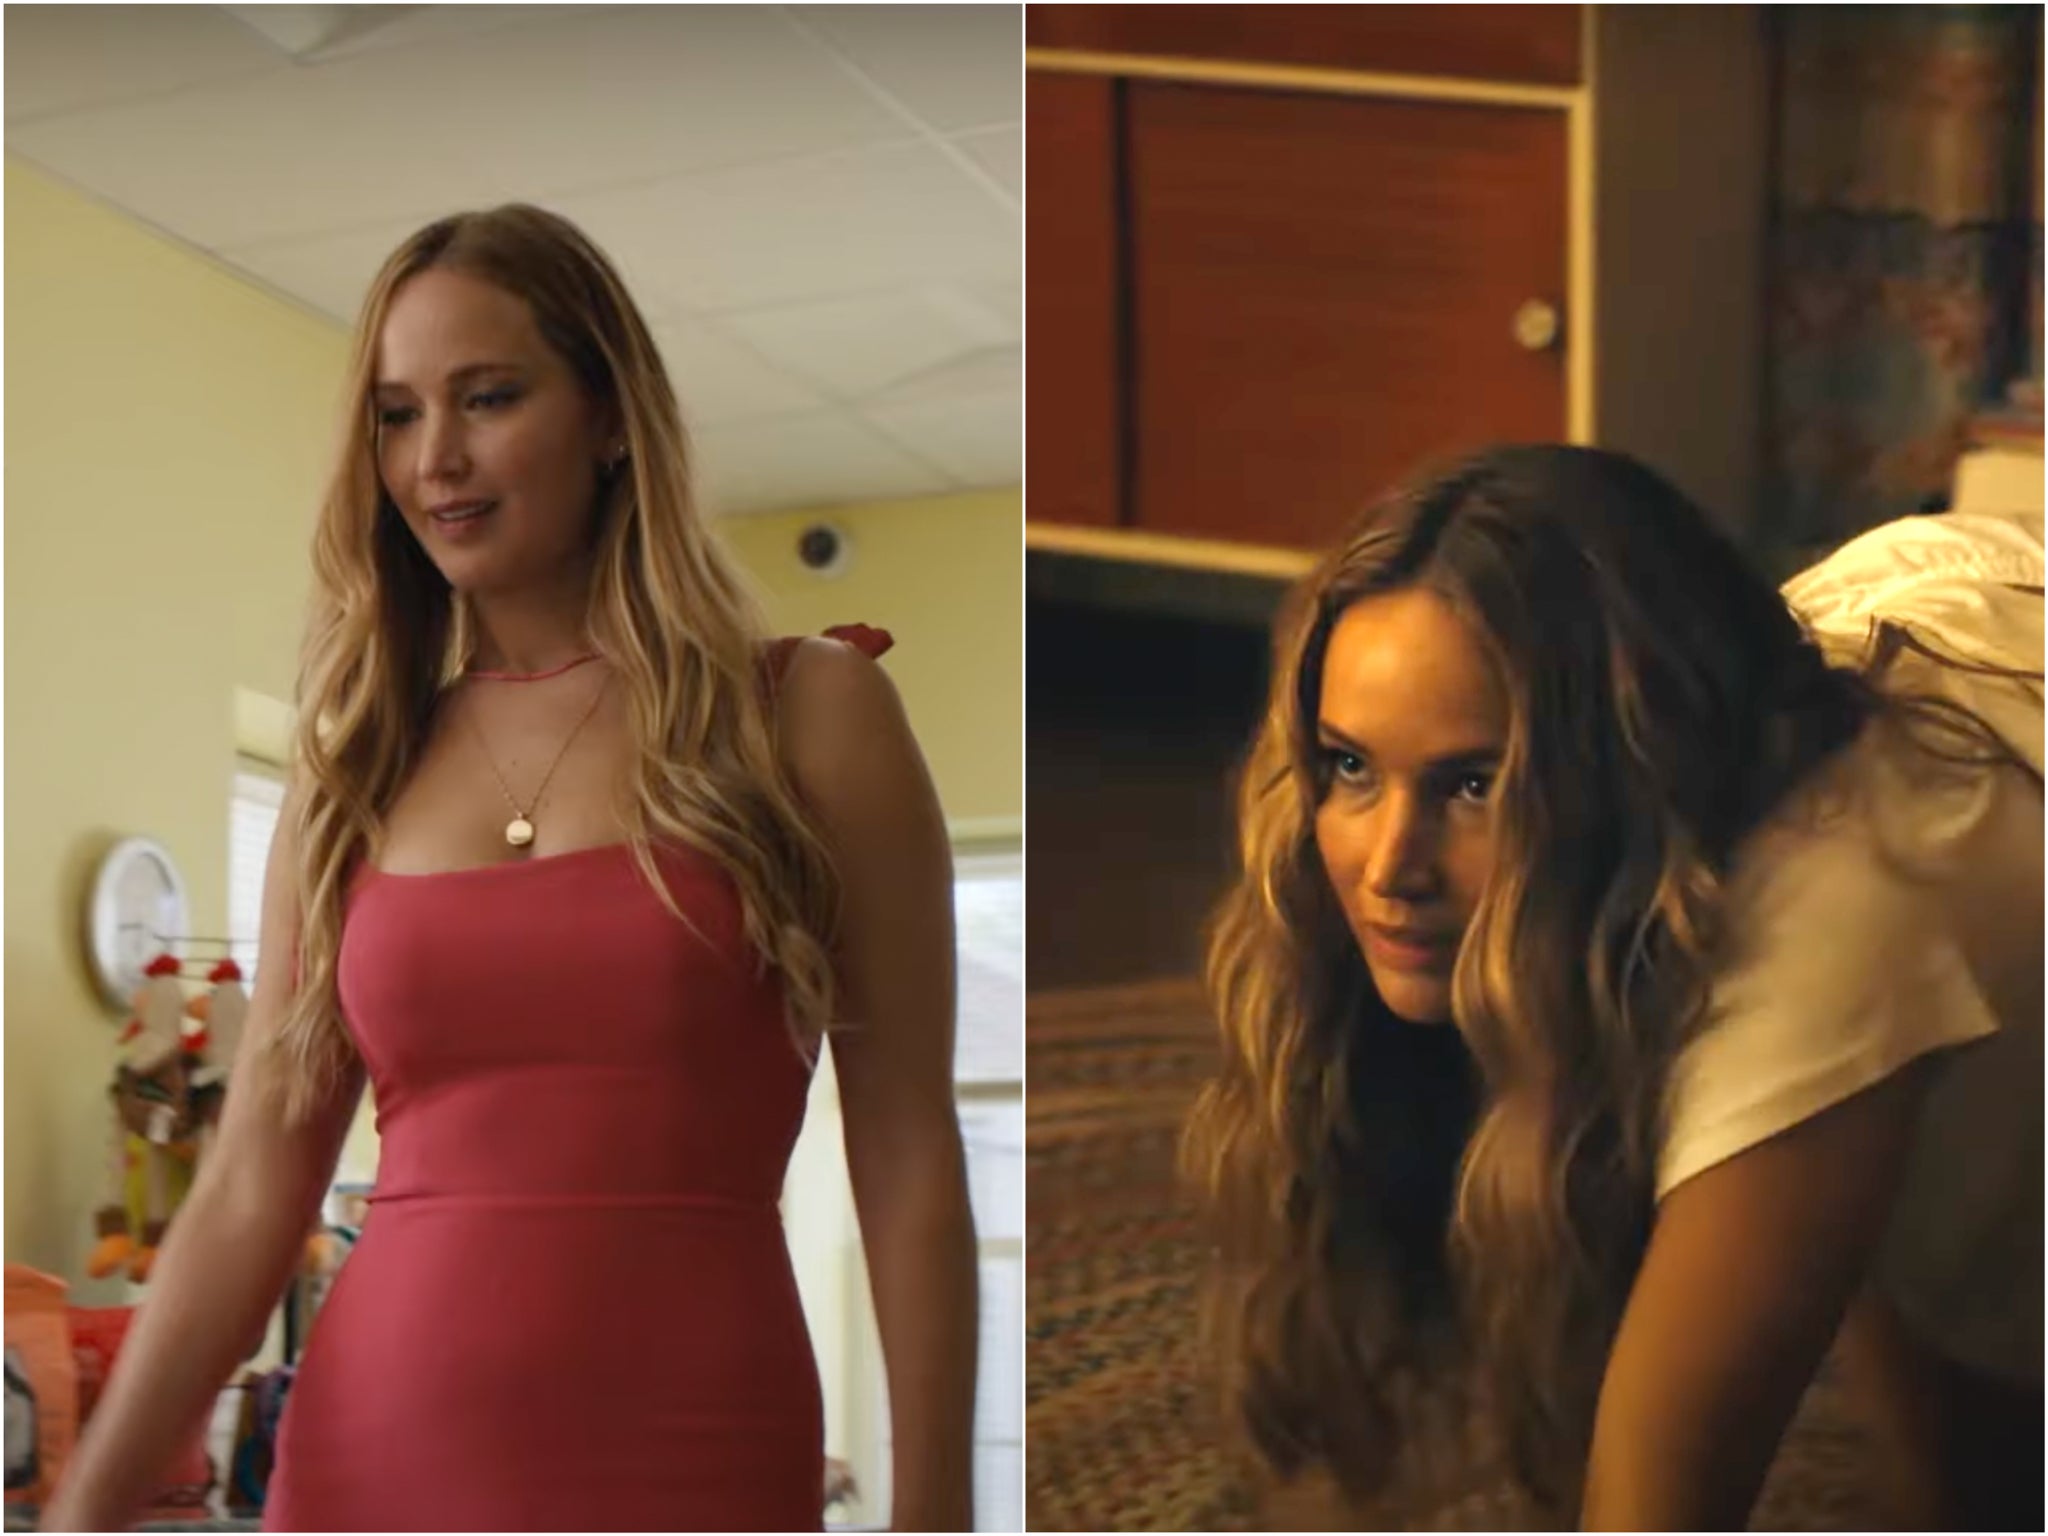 No Hard Feelings Jennifer Lawrence is hired to seduce a 19-year-old boy in new trailer The Independent picture